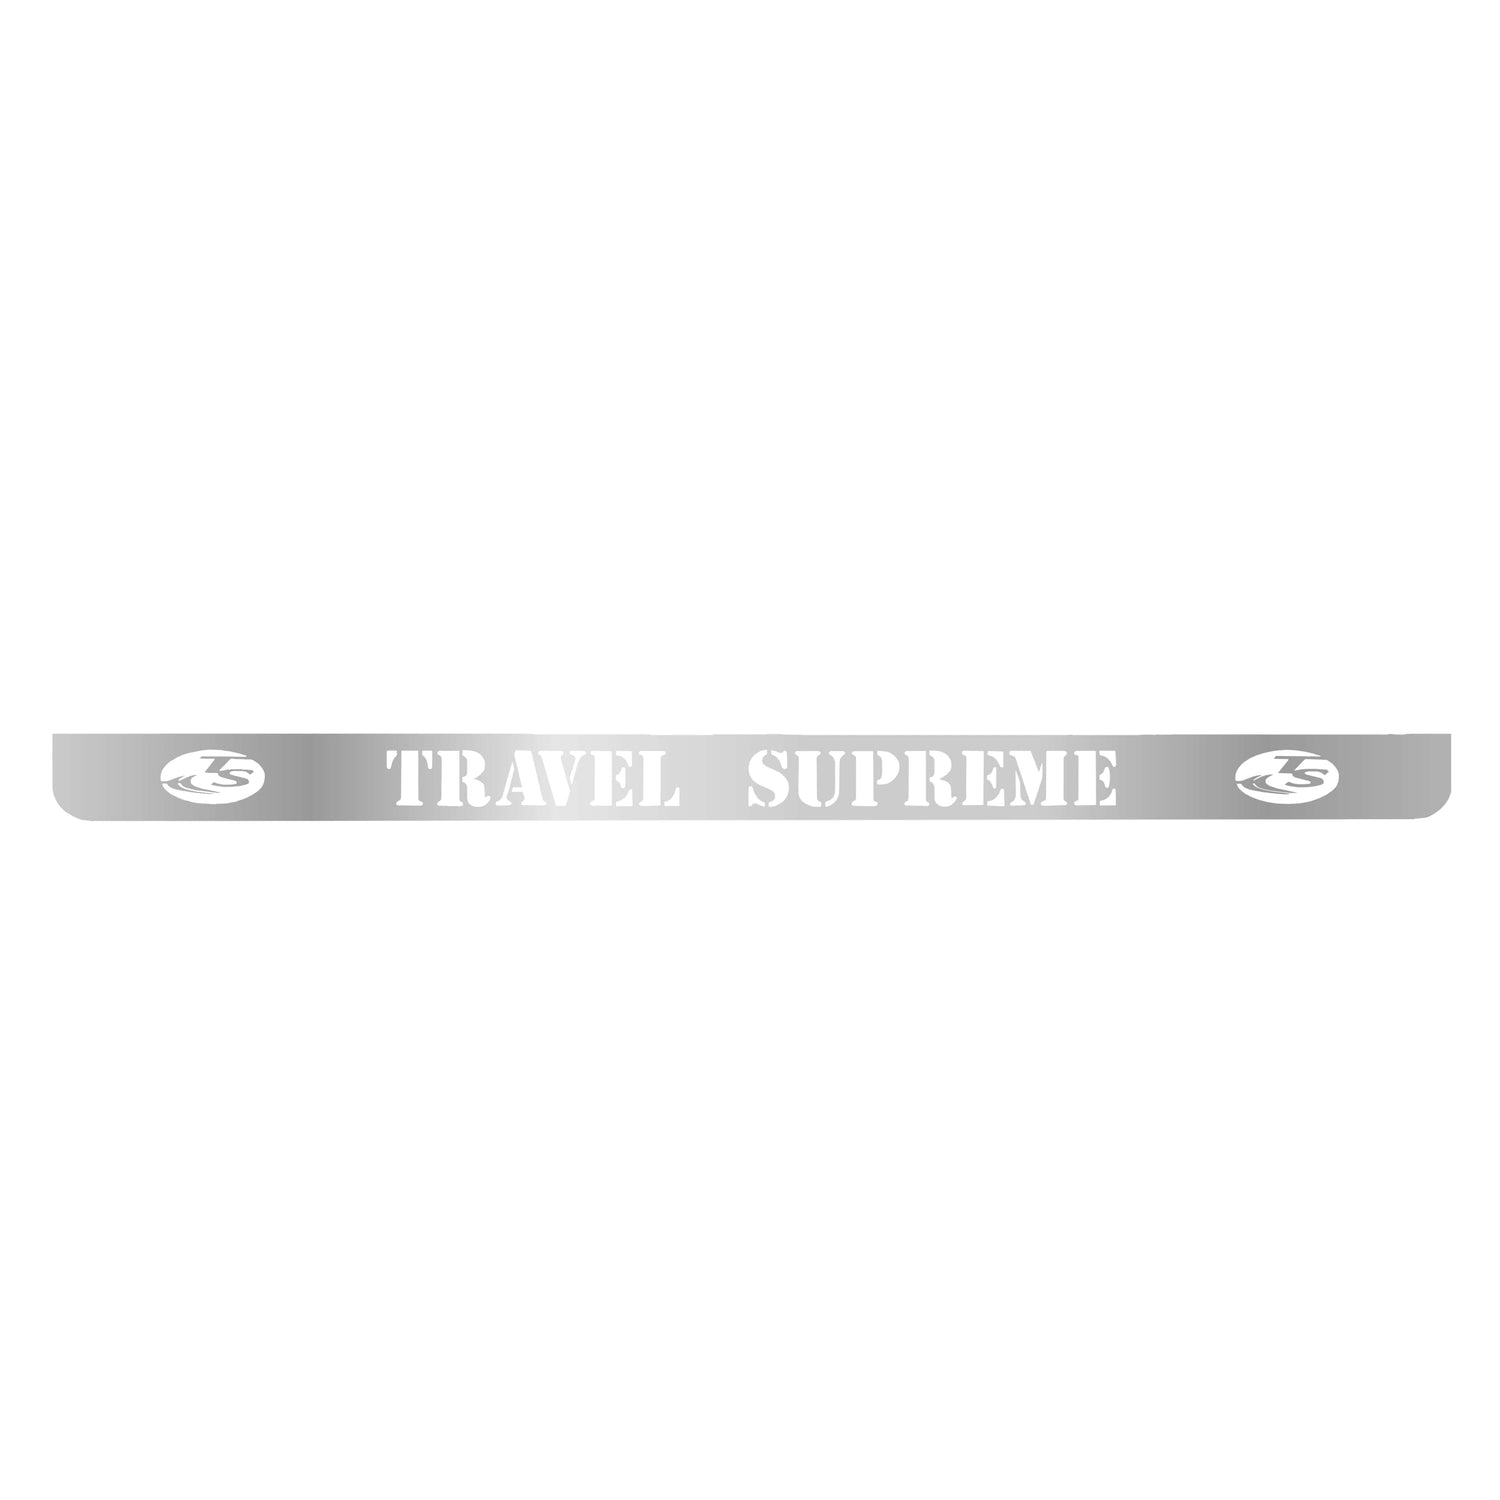 Future-Sales-Travel-Supreme-Face-Plate-stainless-steel-mirror-finish-Height-6-Width-94-backer-plate-SSTS-01S